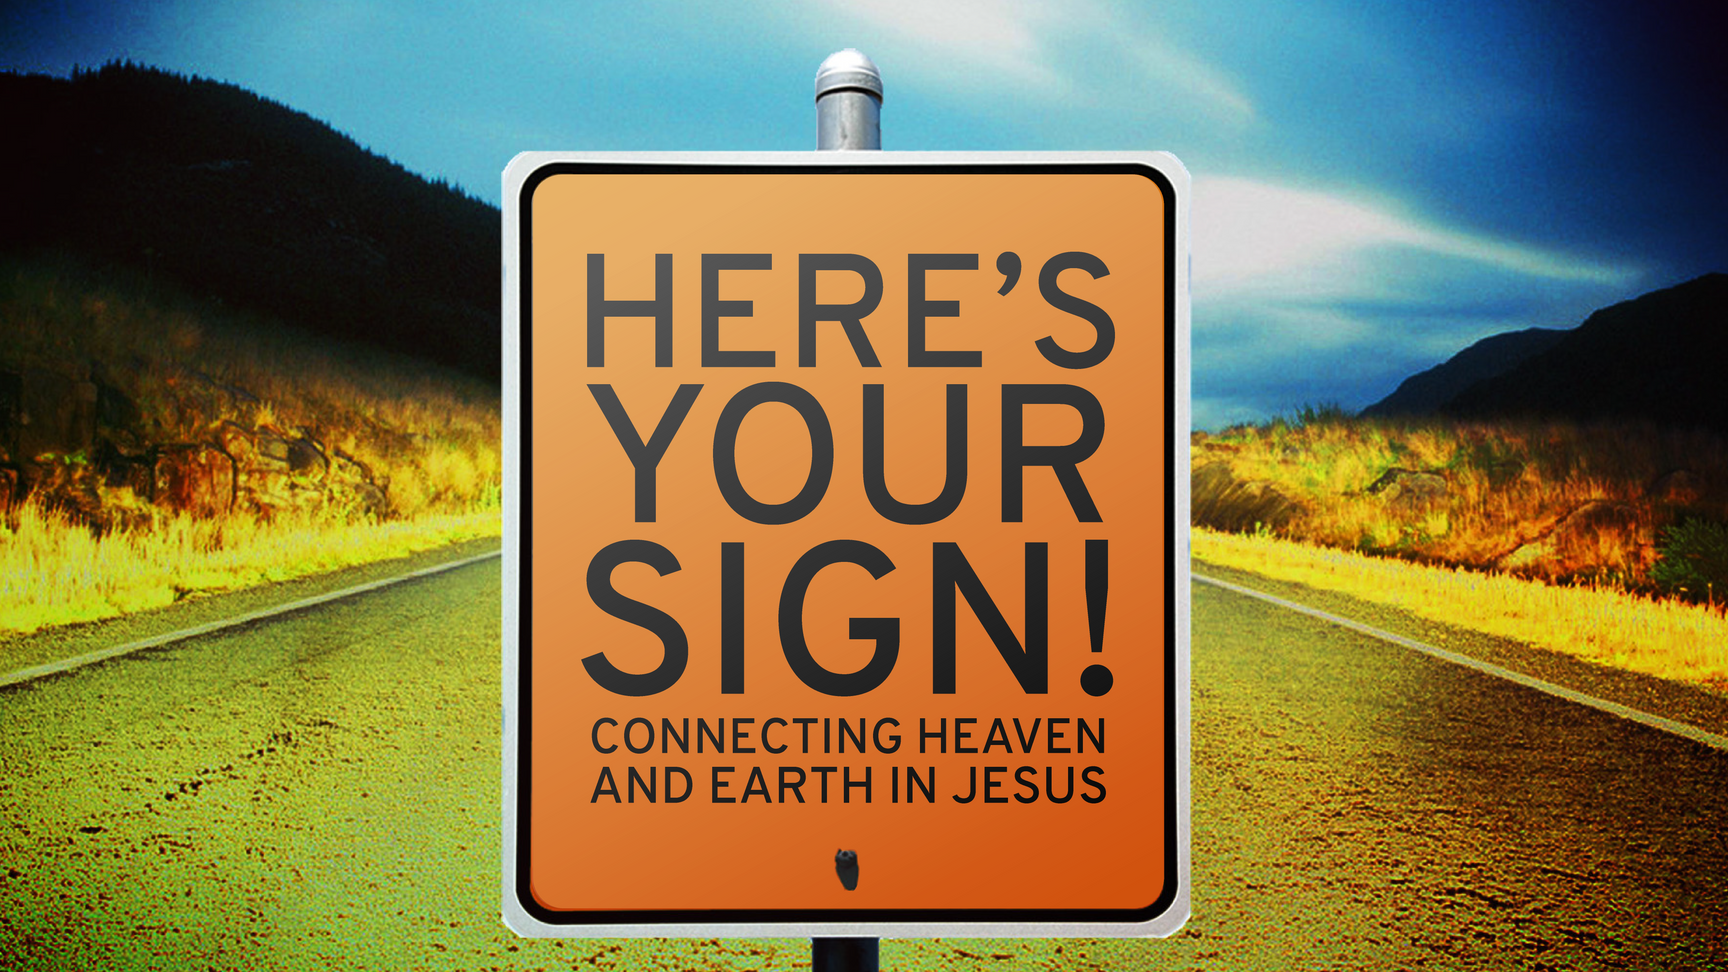 Here's Your Sign!